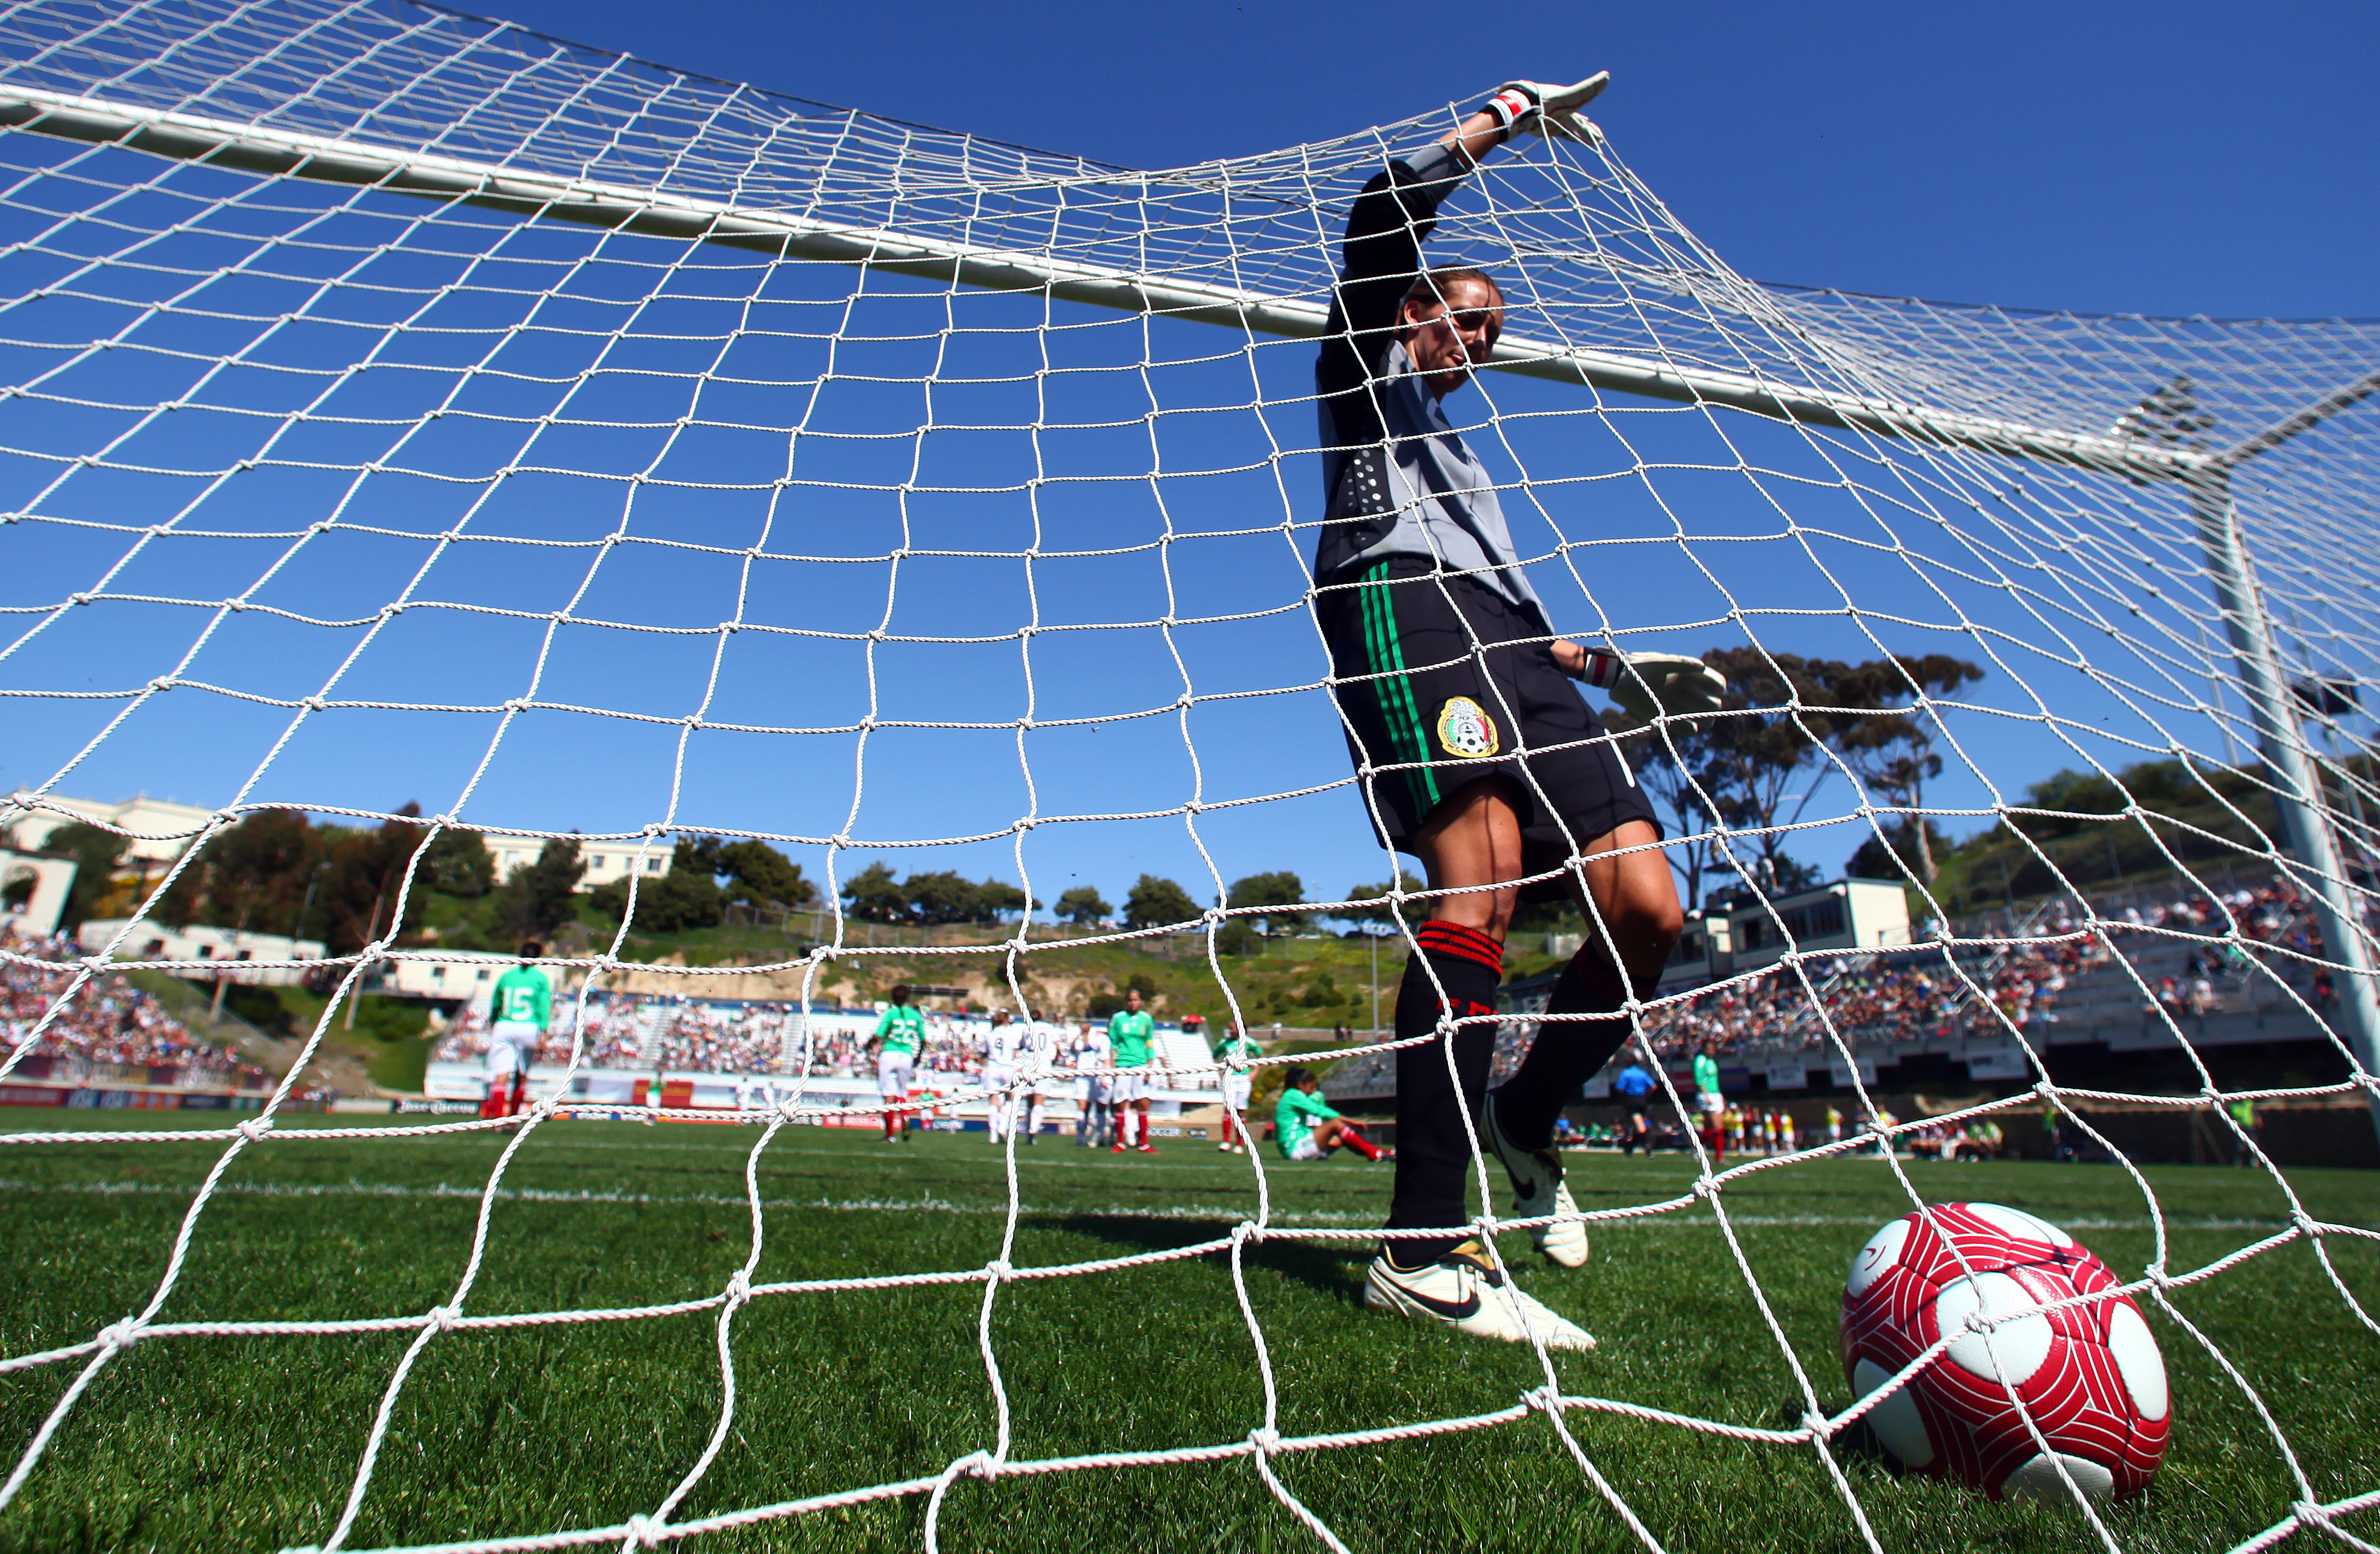 SAN DIEGO - MARCH 28:  Goaltender Erika Vanegas #1 of Mexico pulls the ball out after a USA goal during the Women's International Friendly Soccer Match between Mexico and the United States at Torero Stadium on March 28, 2010 in San Diego, California. USA